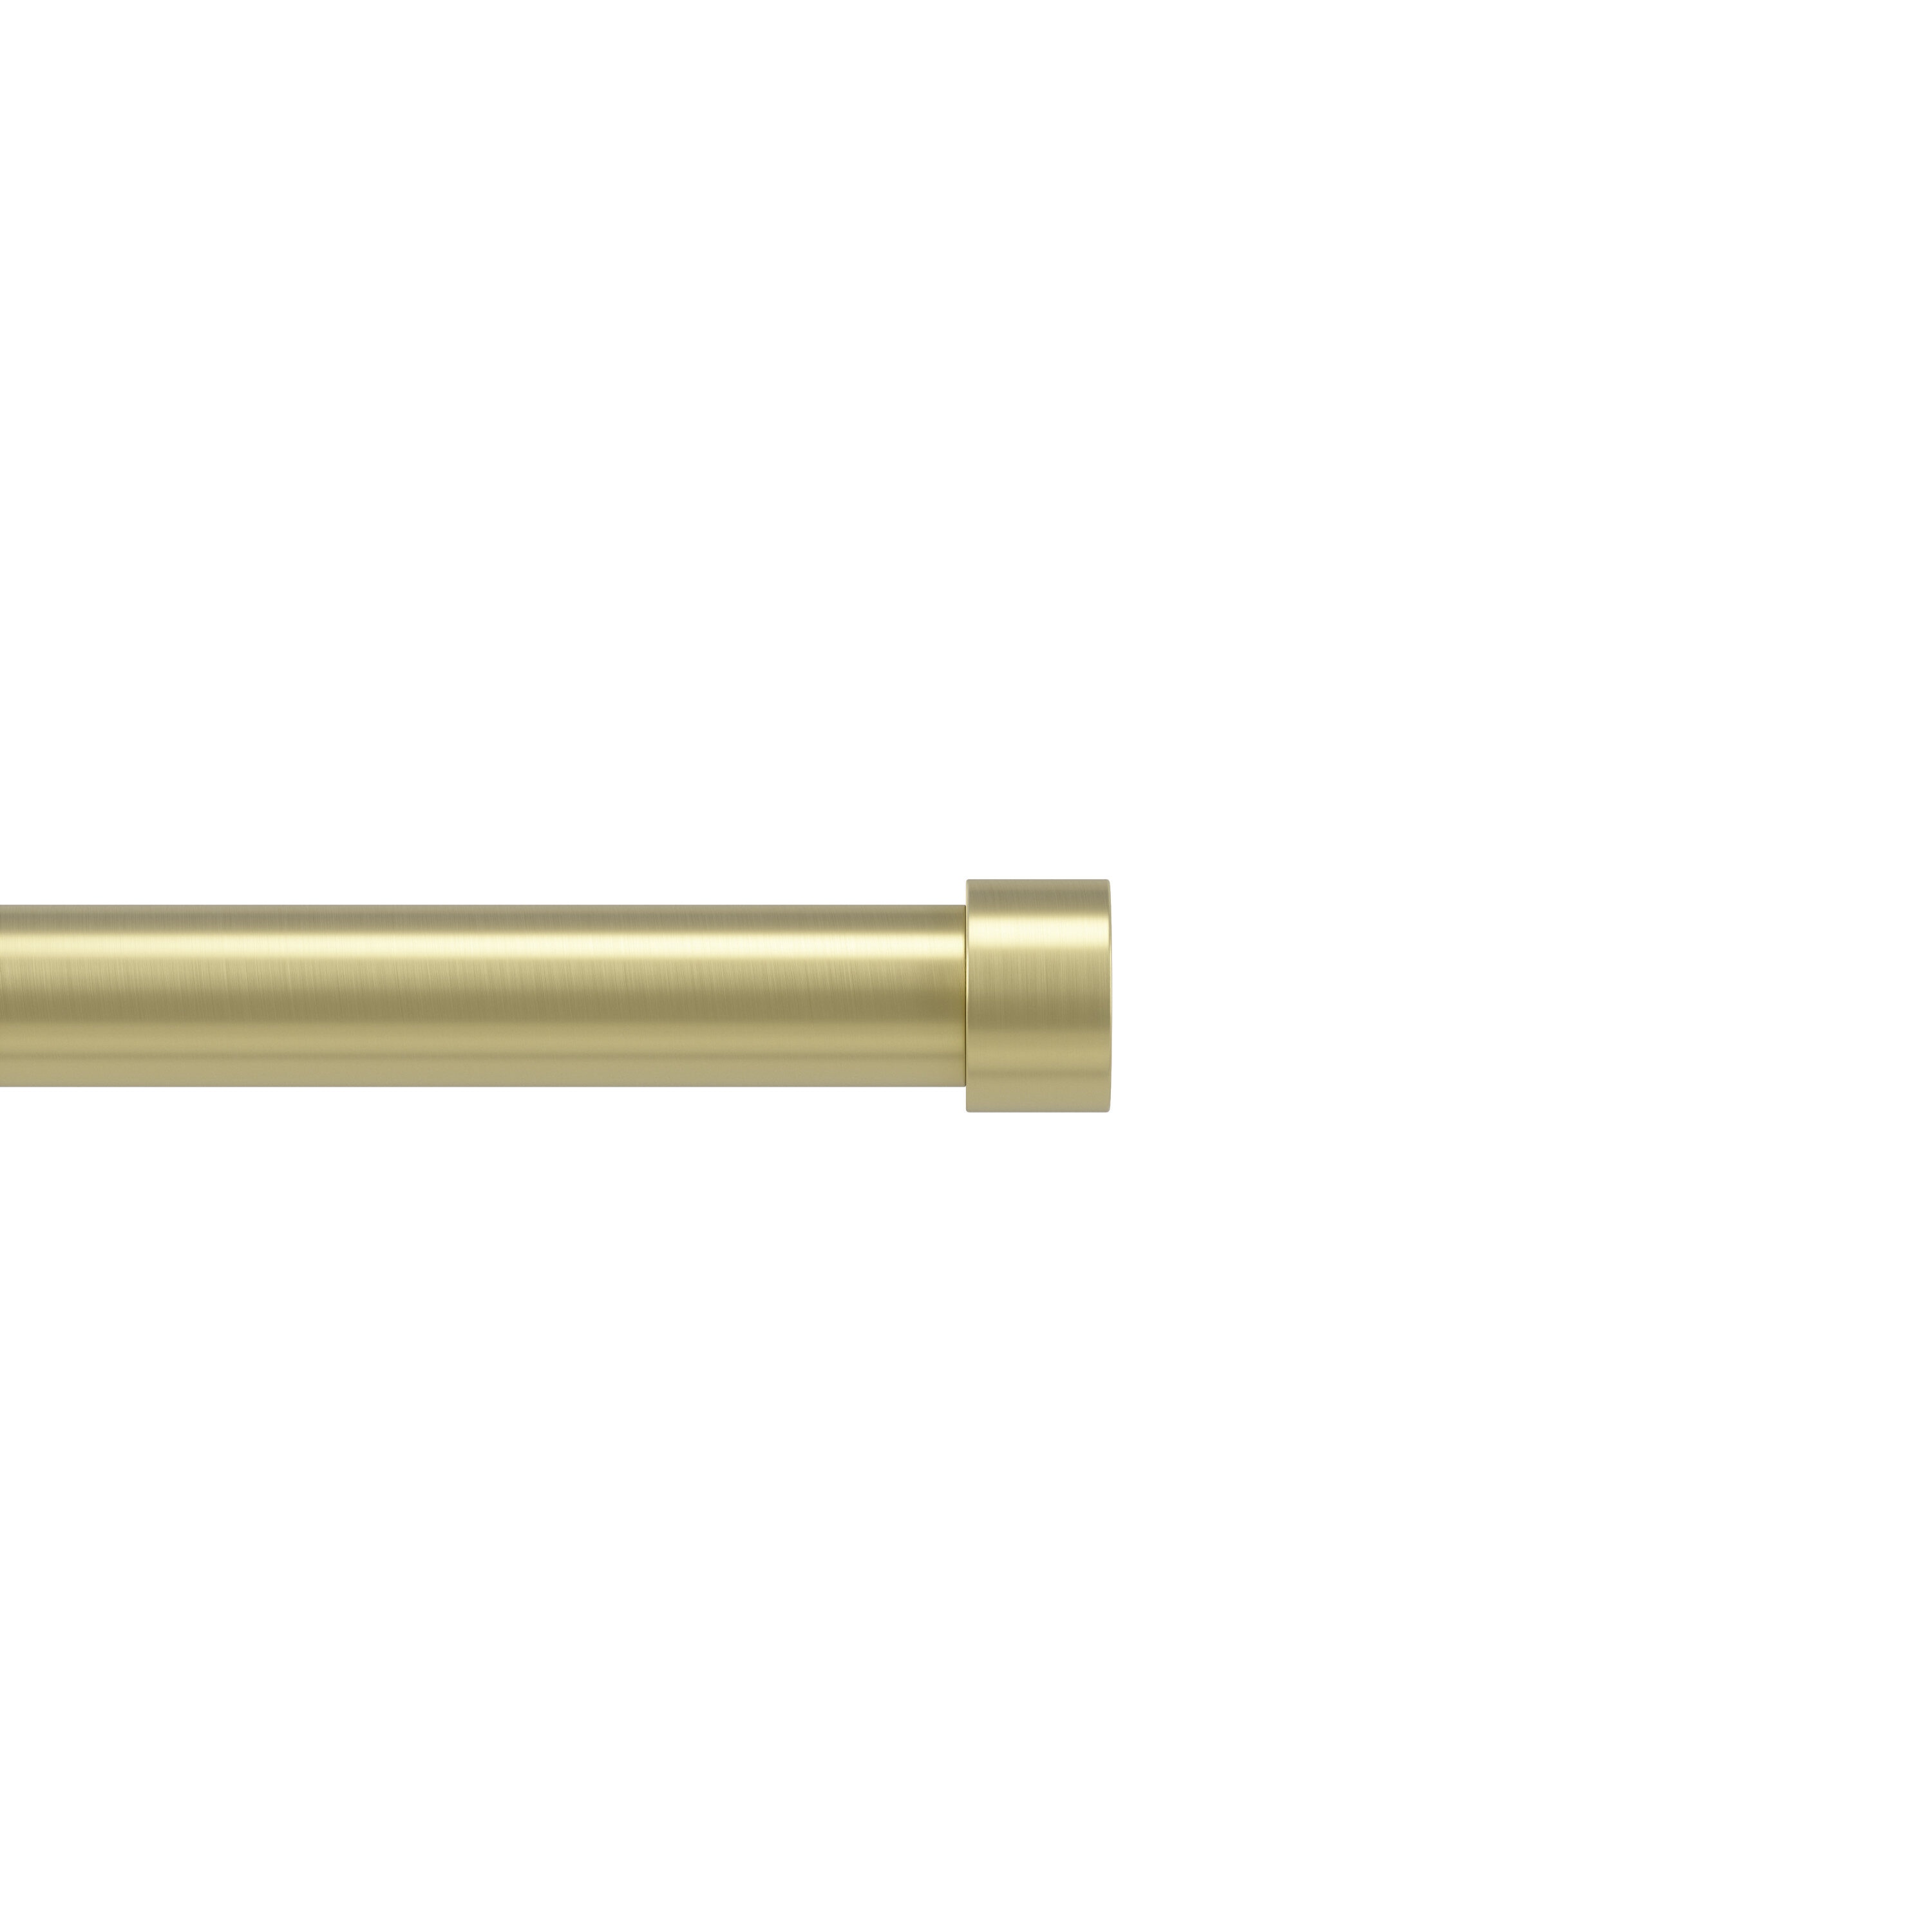 Umbra CAPPA 1 ROD 120-180 BRASS in the Curtain Rods department at